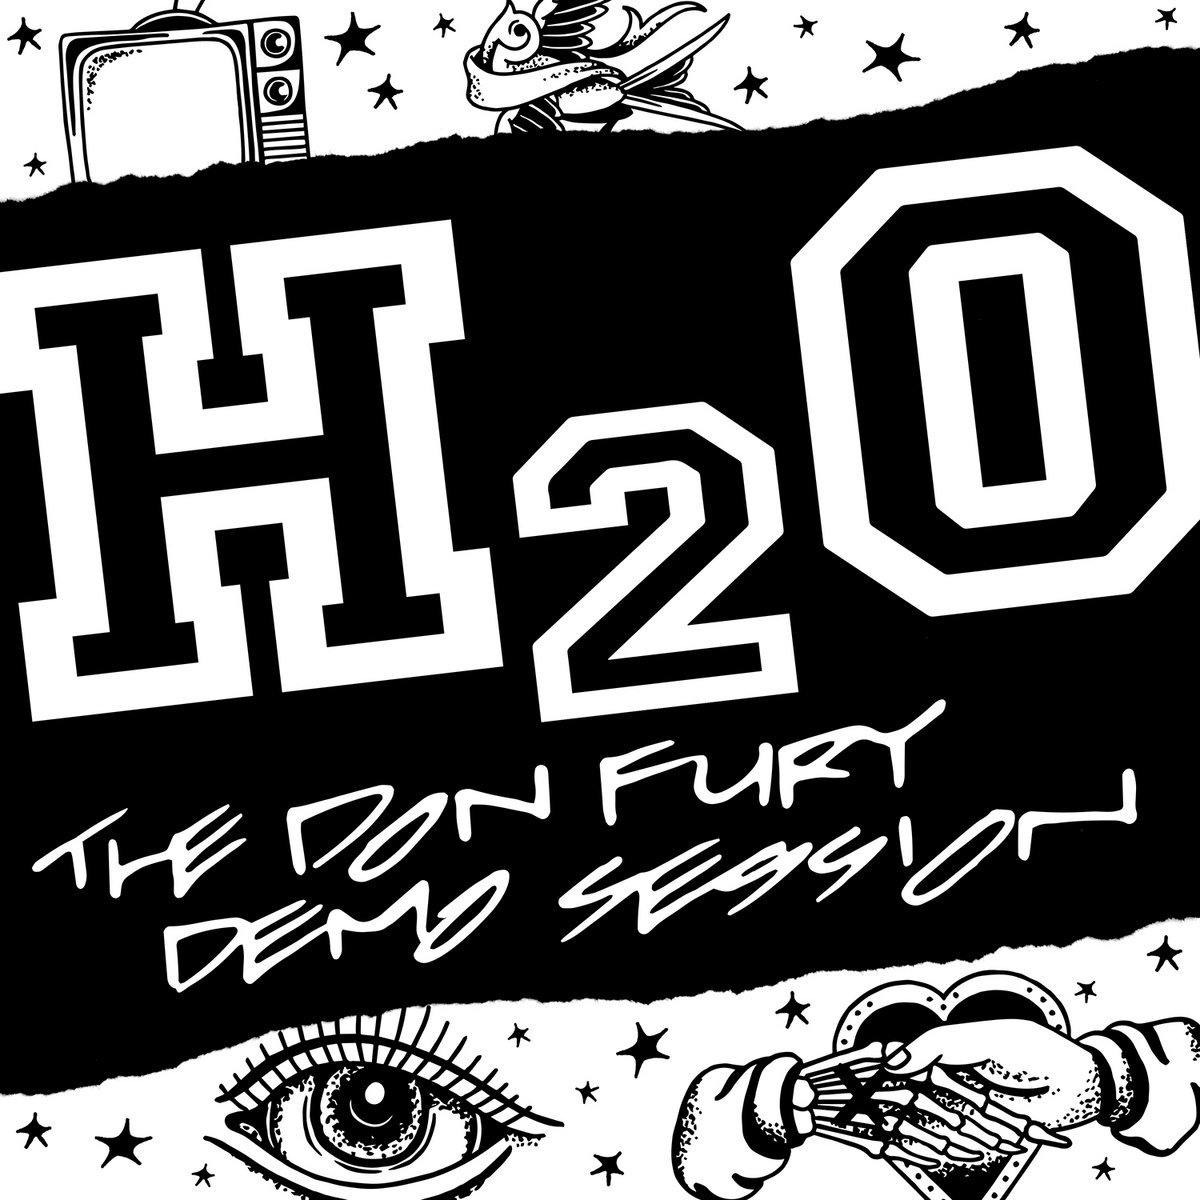 Buy – H2O "The Don Fury Demo Session" 12" – Band & Music Merch – Cold Cuts Merch